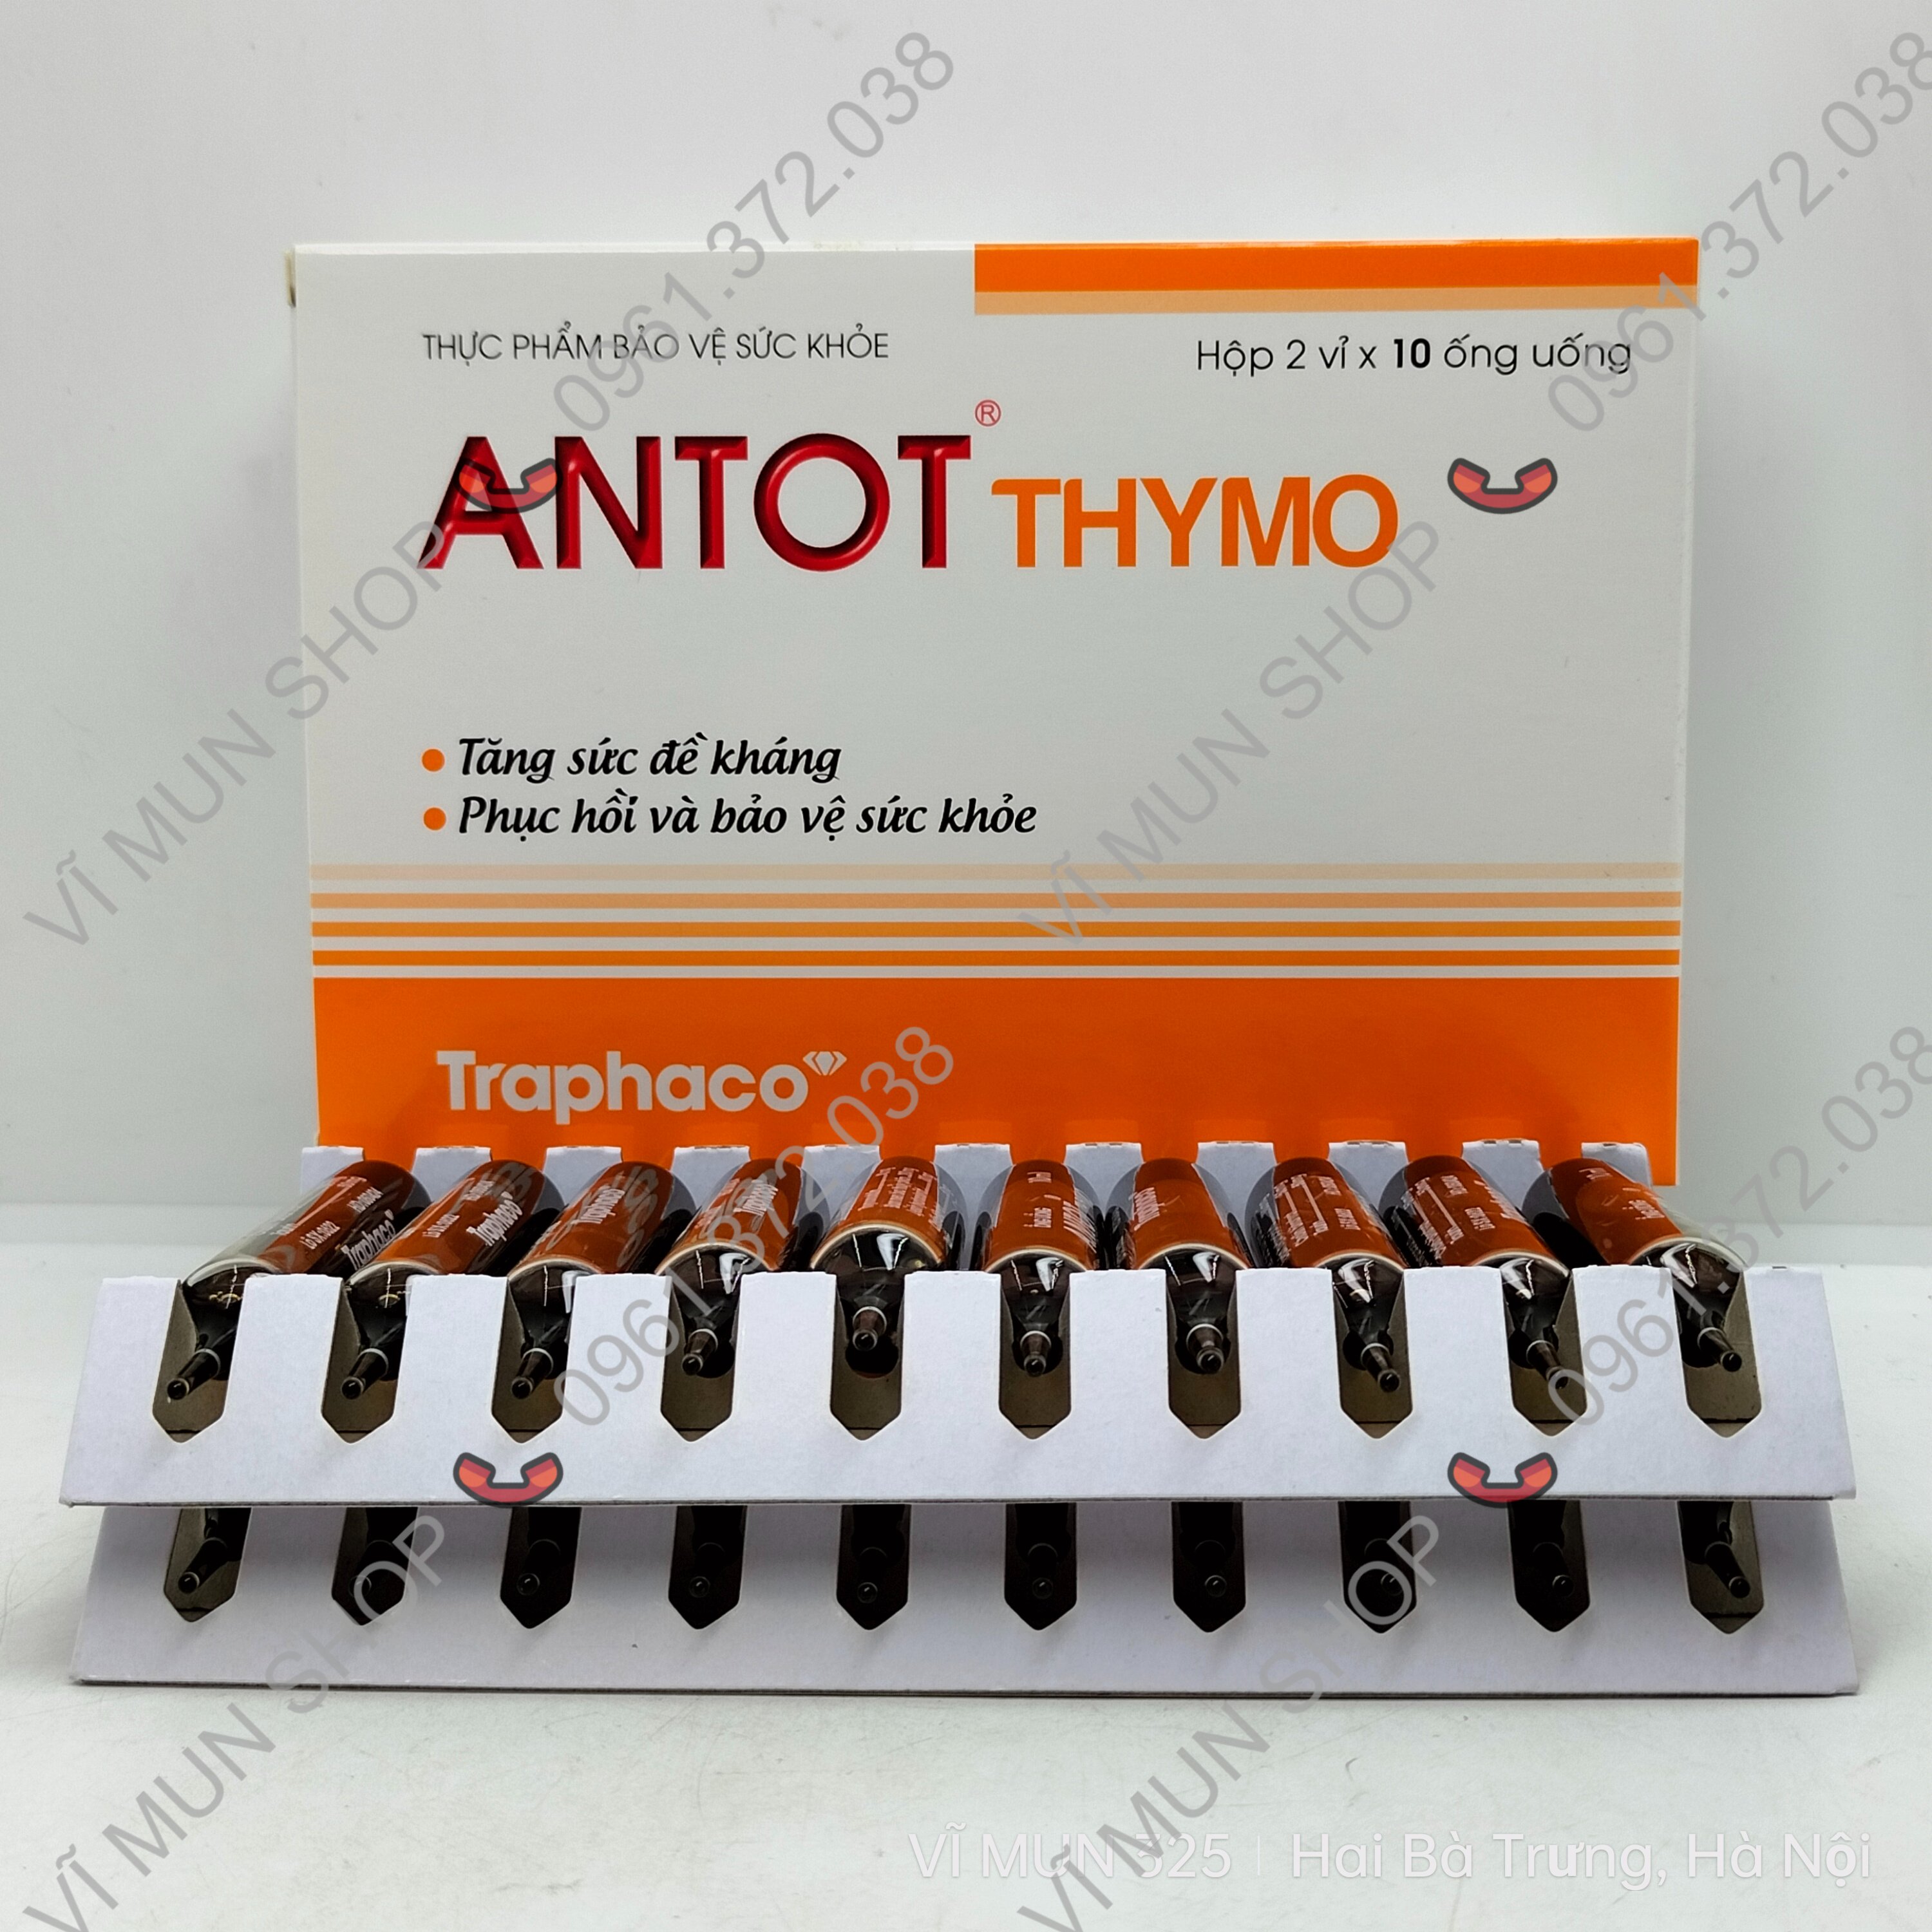 ANTOT THYMO Traphaco hộp 20 ống